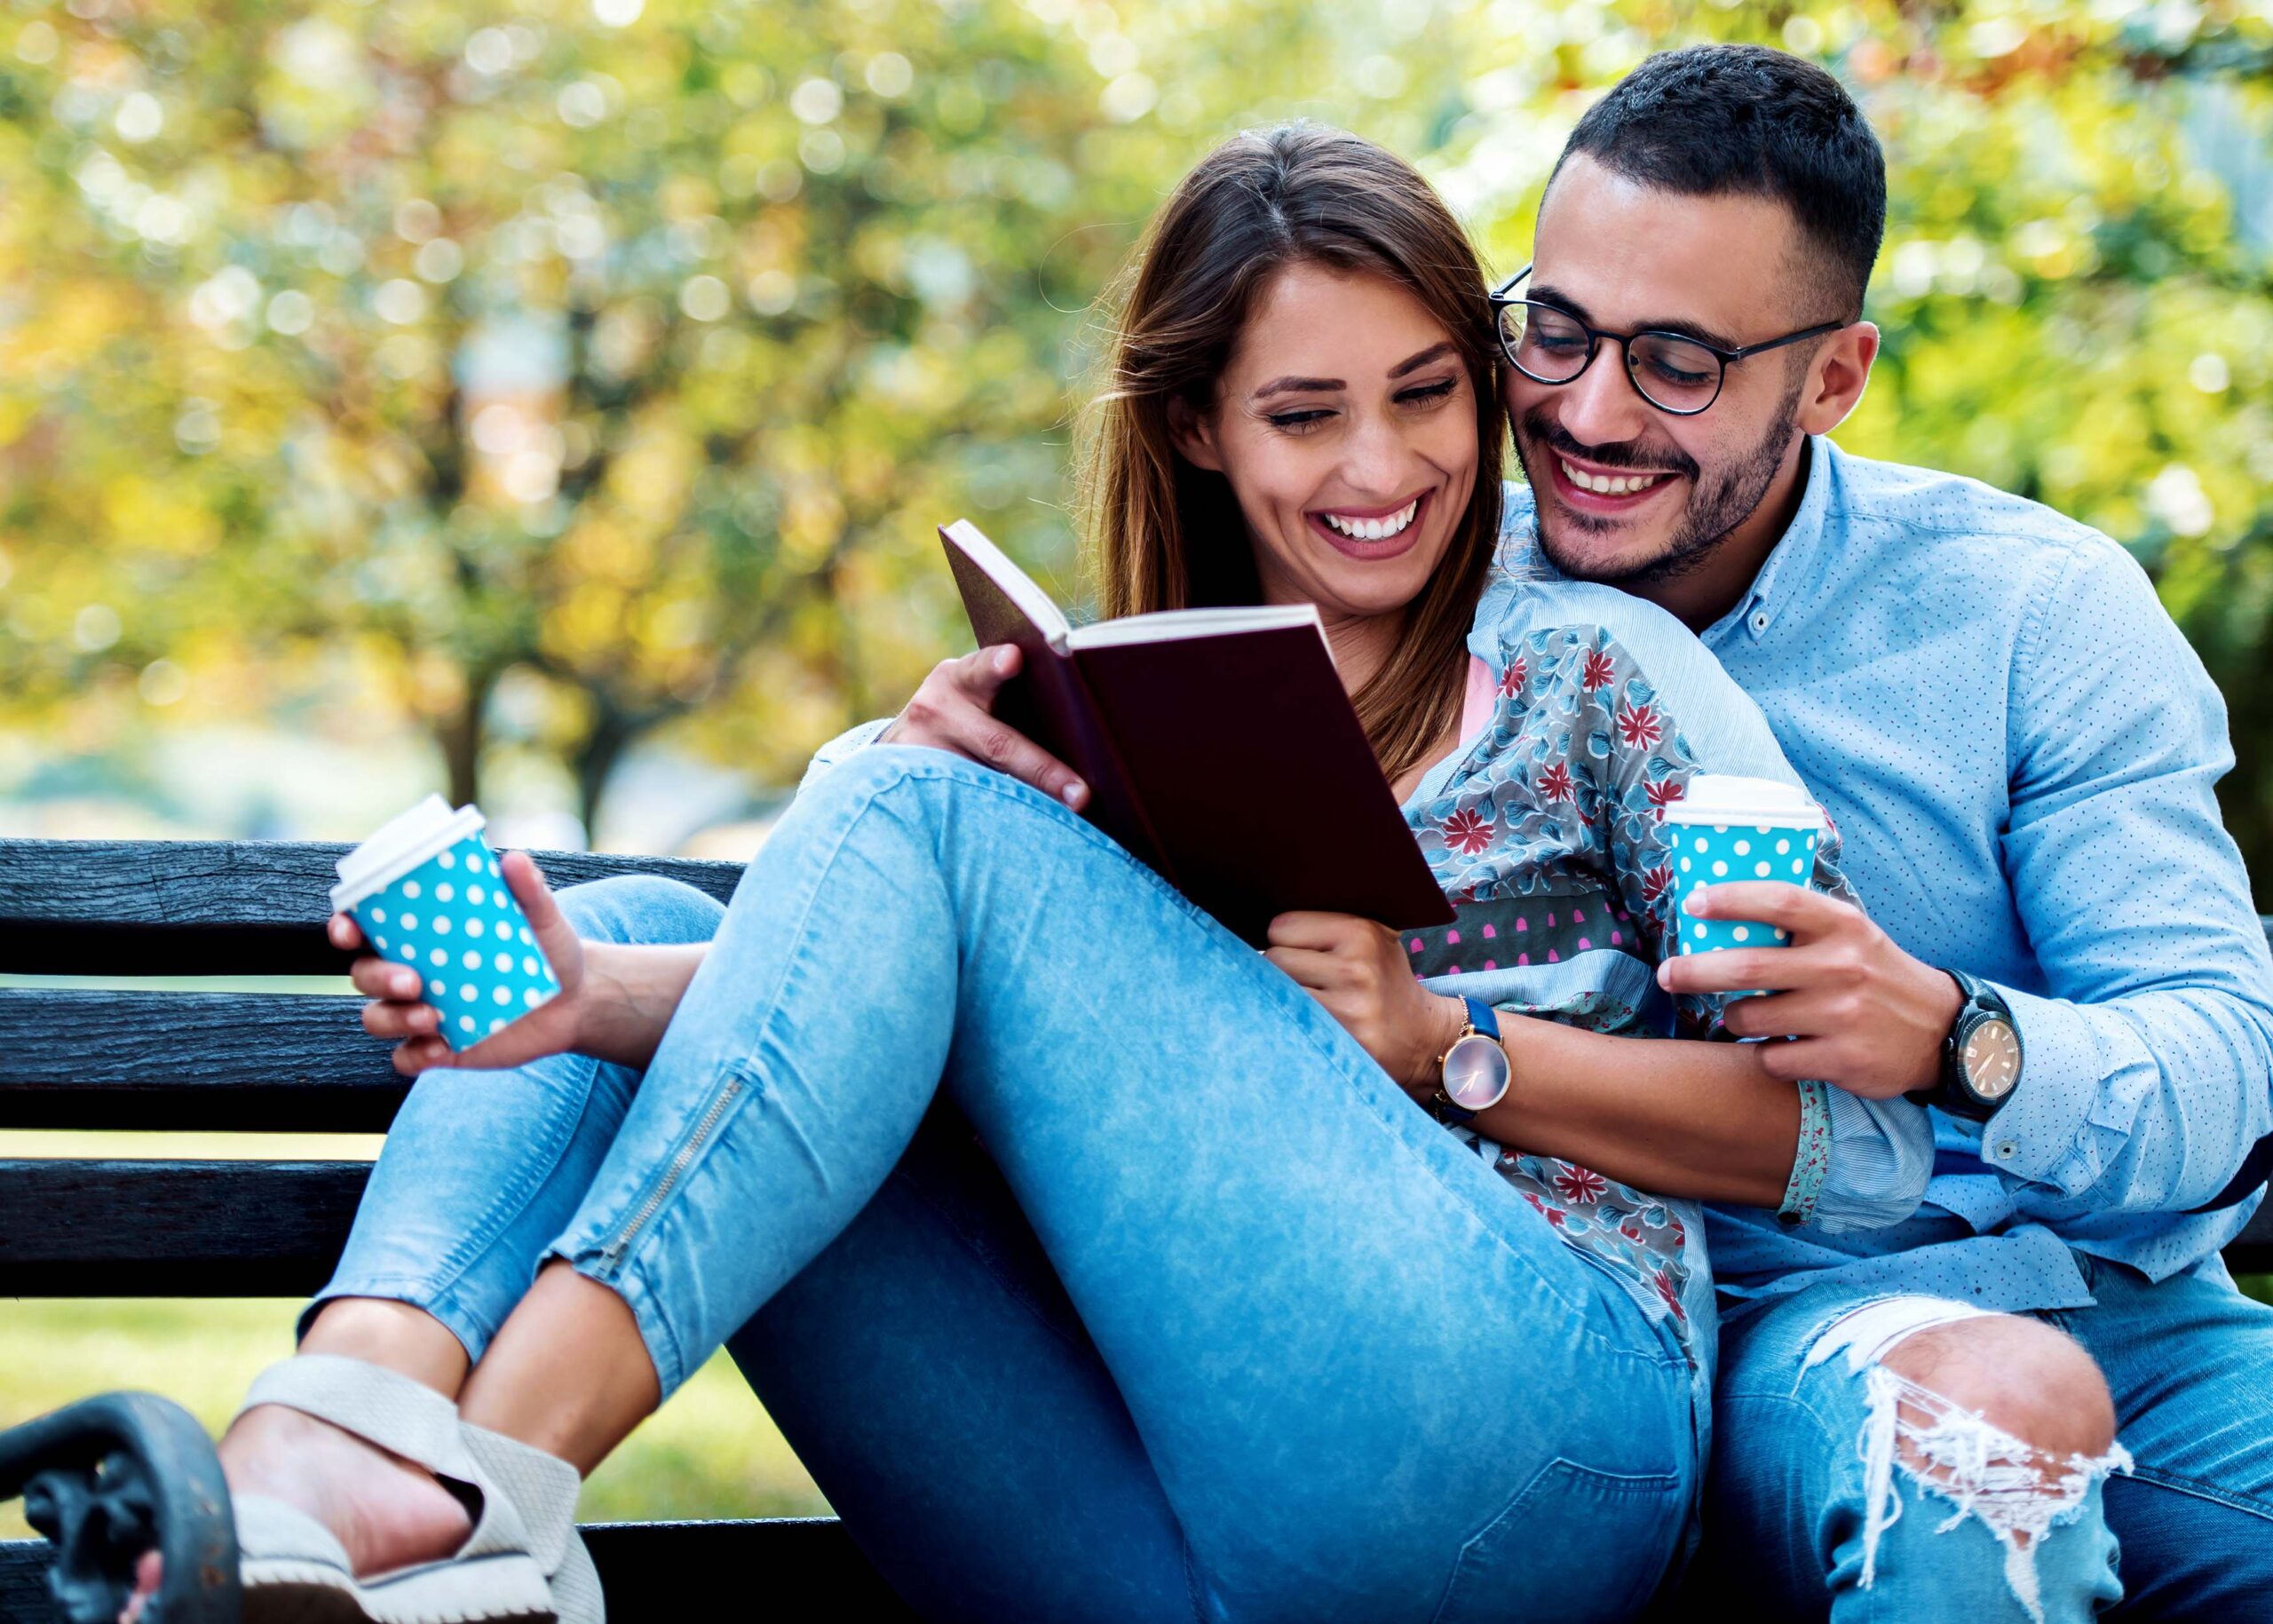 couple sitting on a bench smiling and reading a book